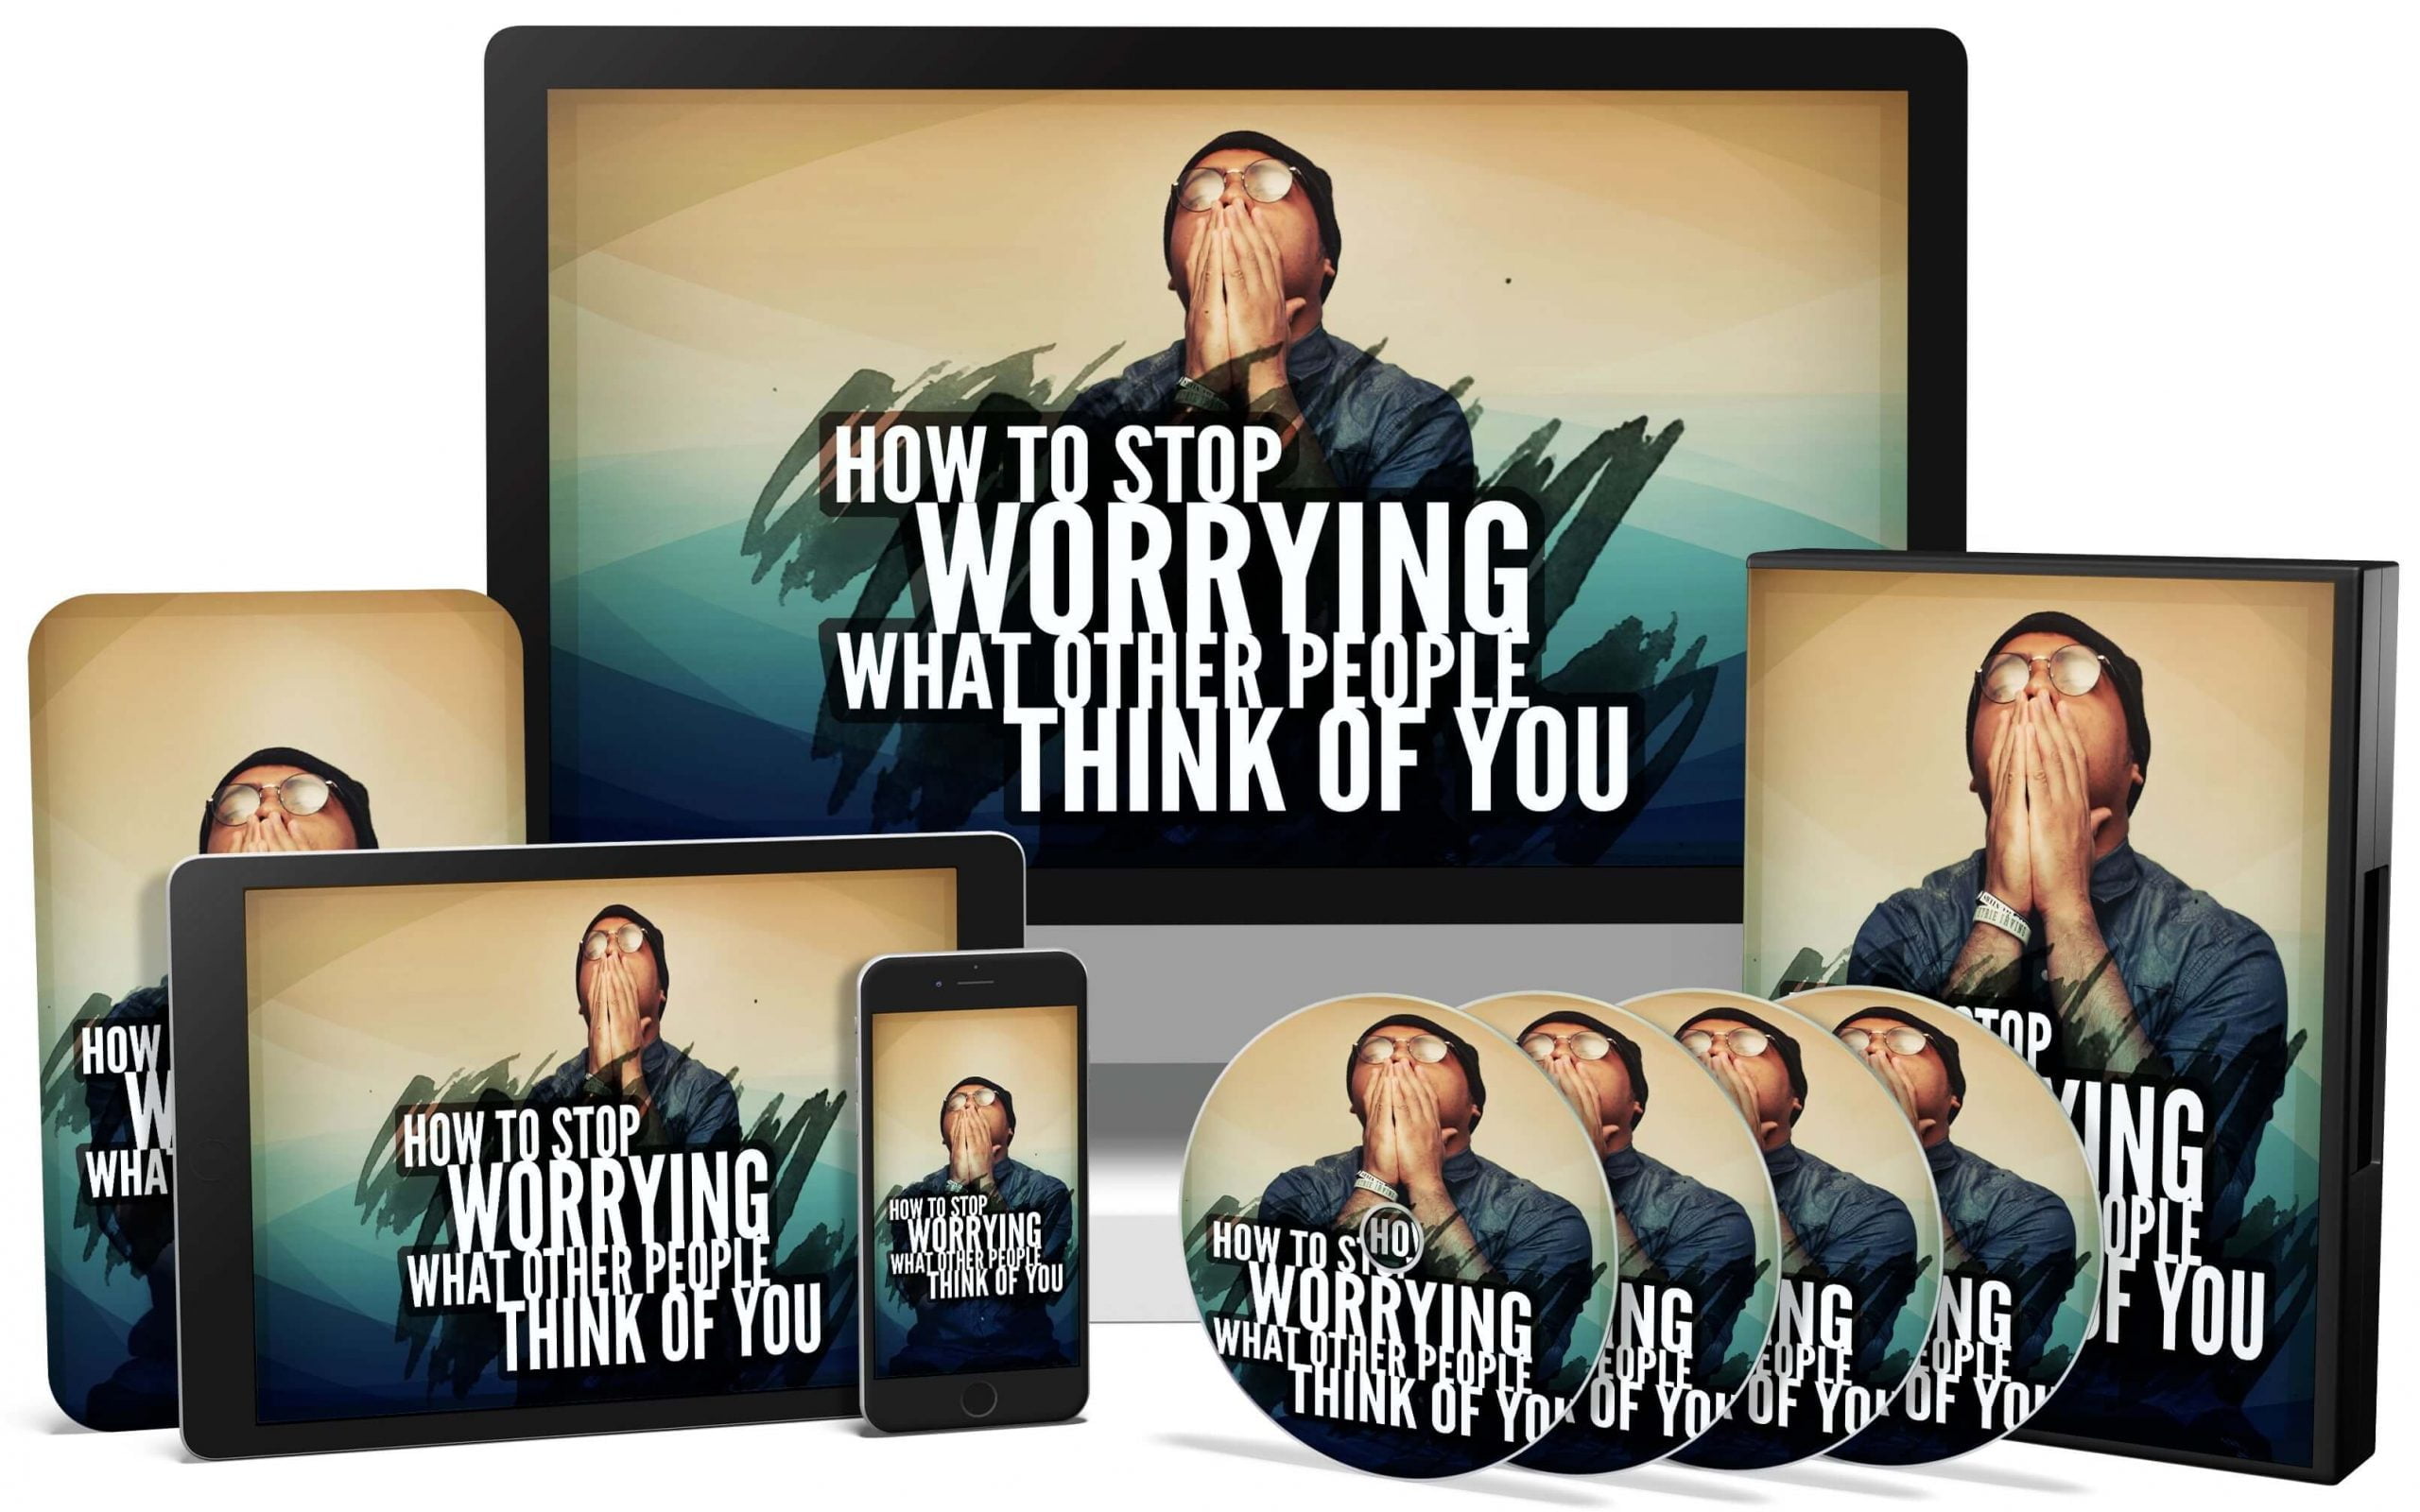 How-To-Stop-Worrying-What-Other-People-Think-Of-You-Review